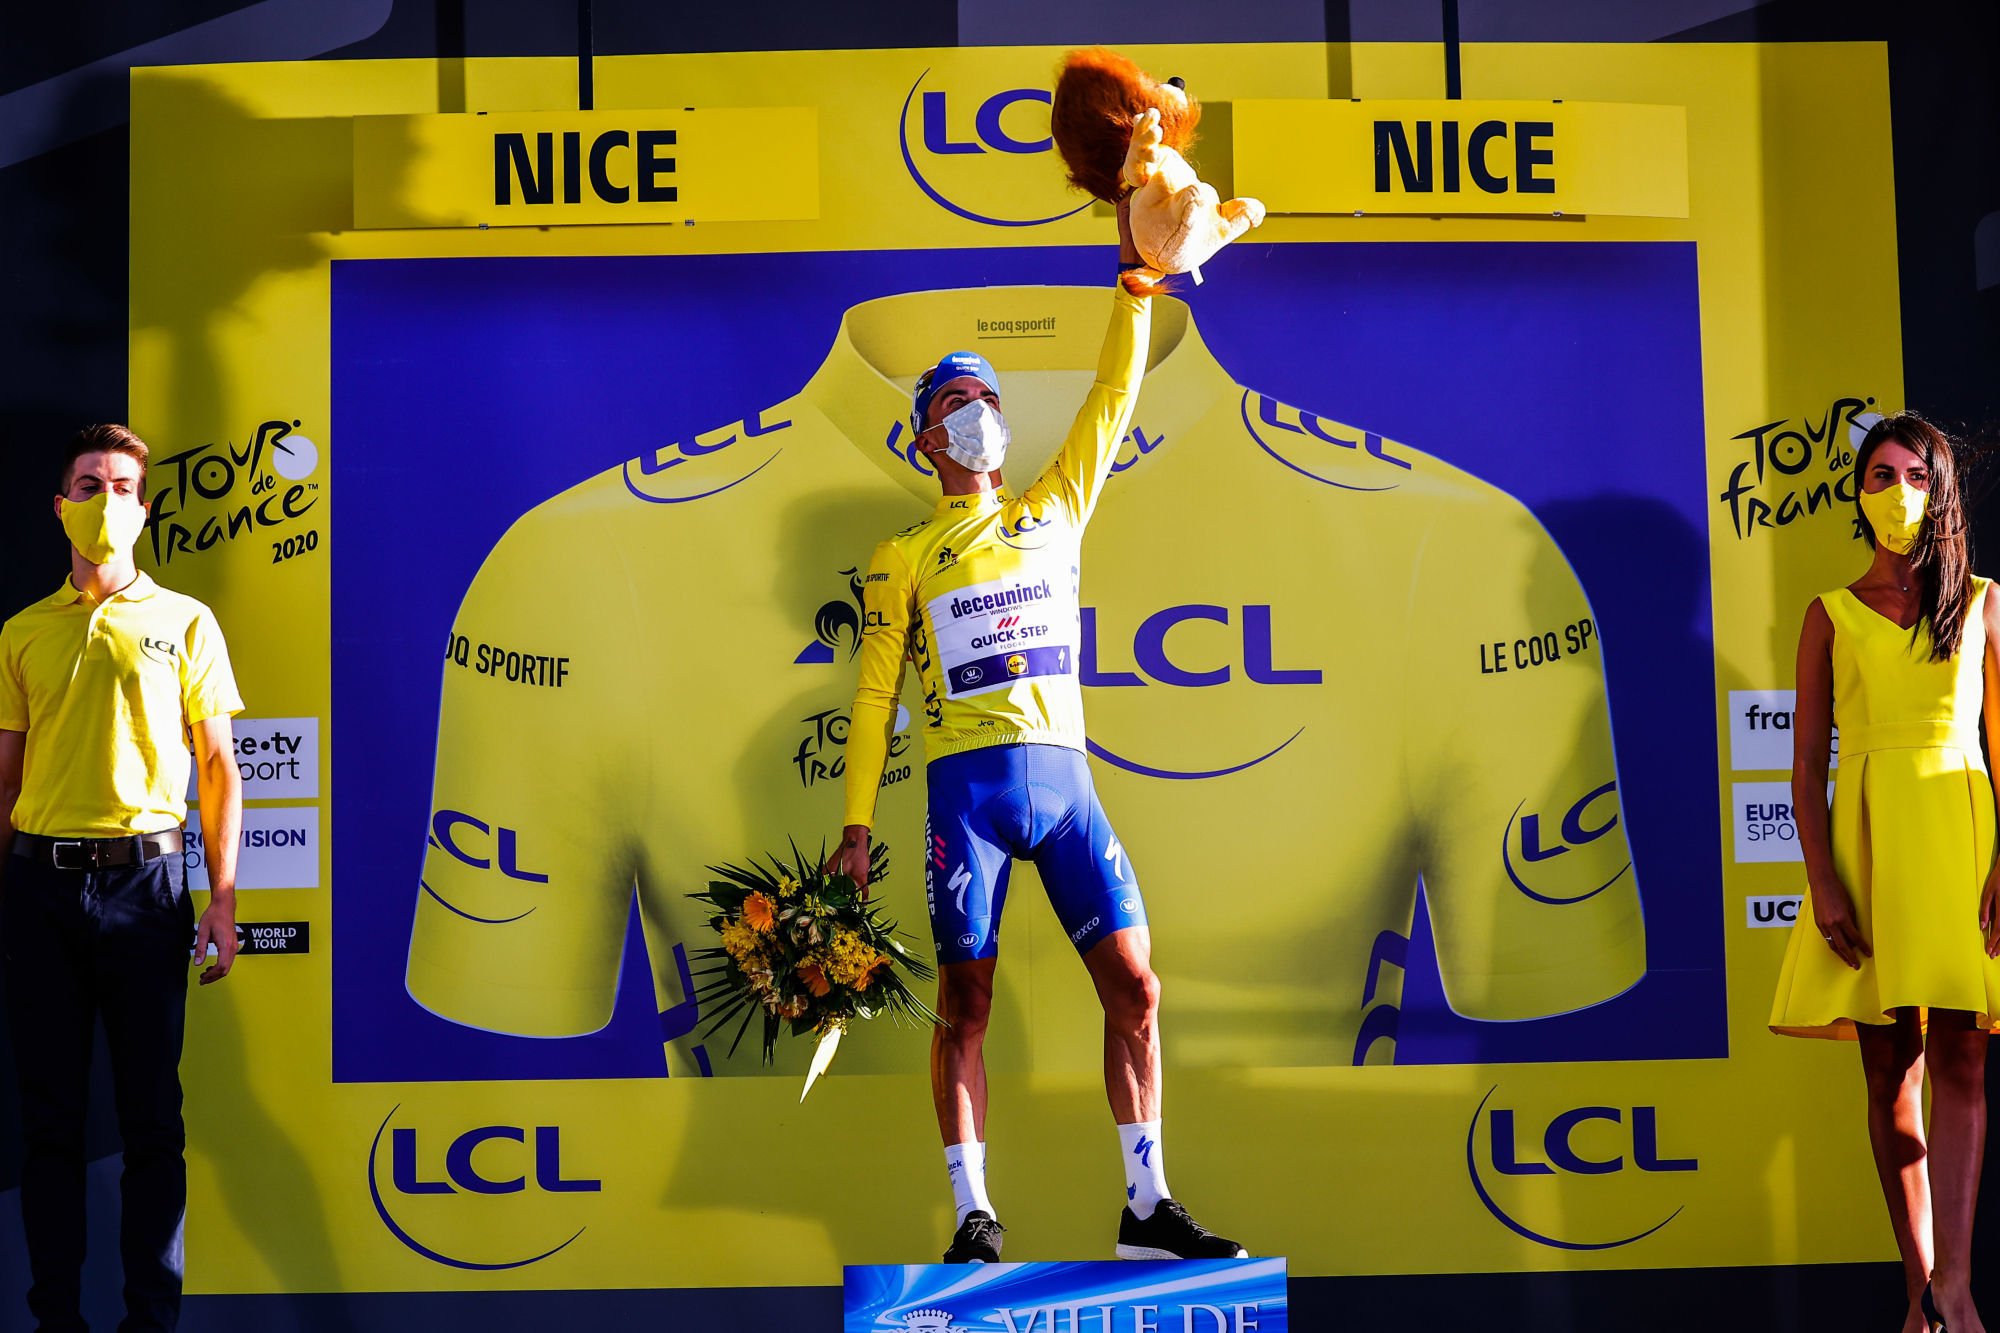 Julian Alaphilippe -Deceuninck - Quick-Step 
Photo by Icon Sport